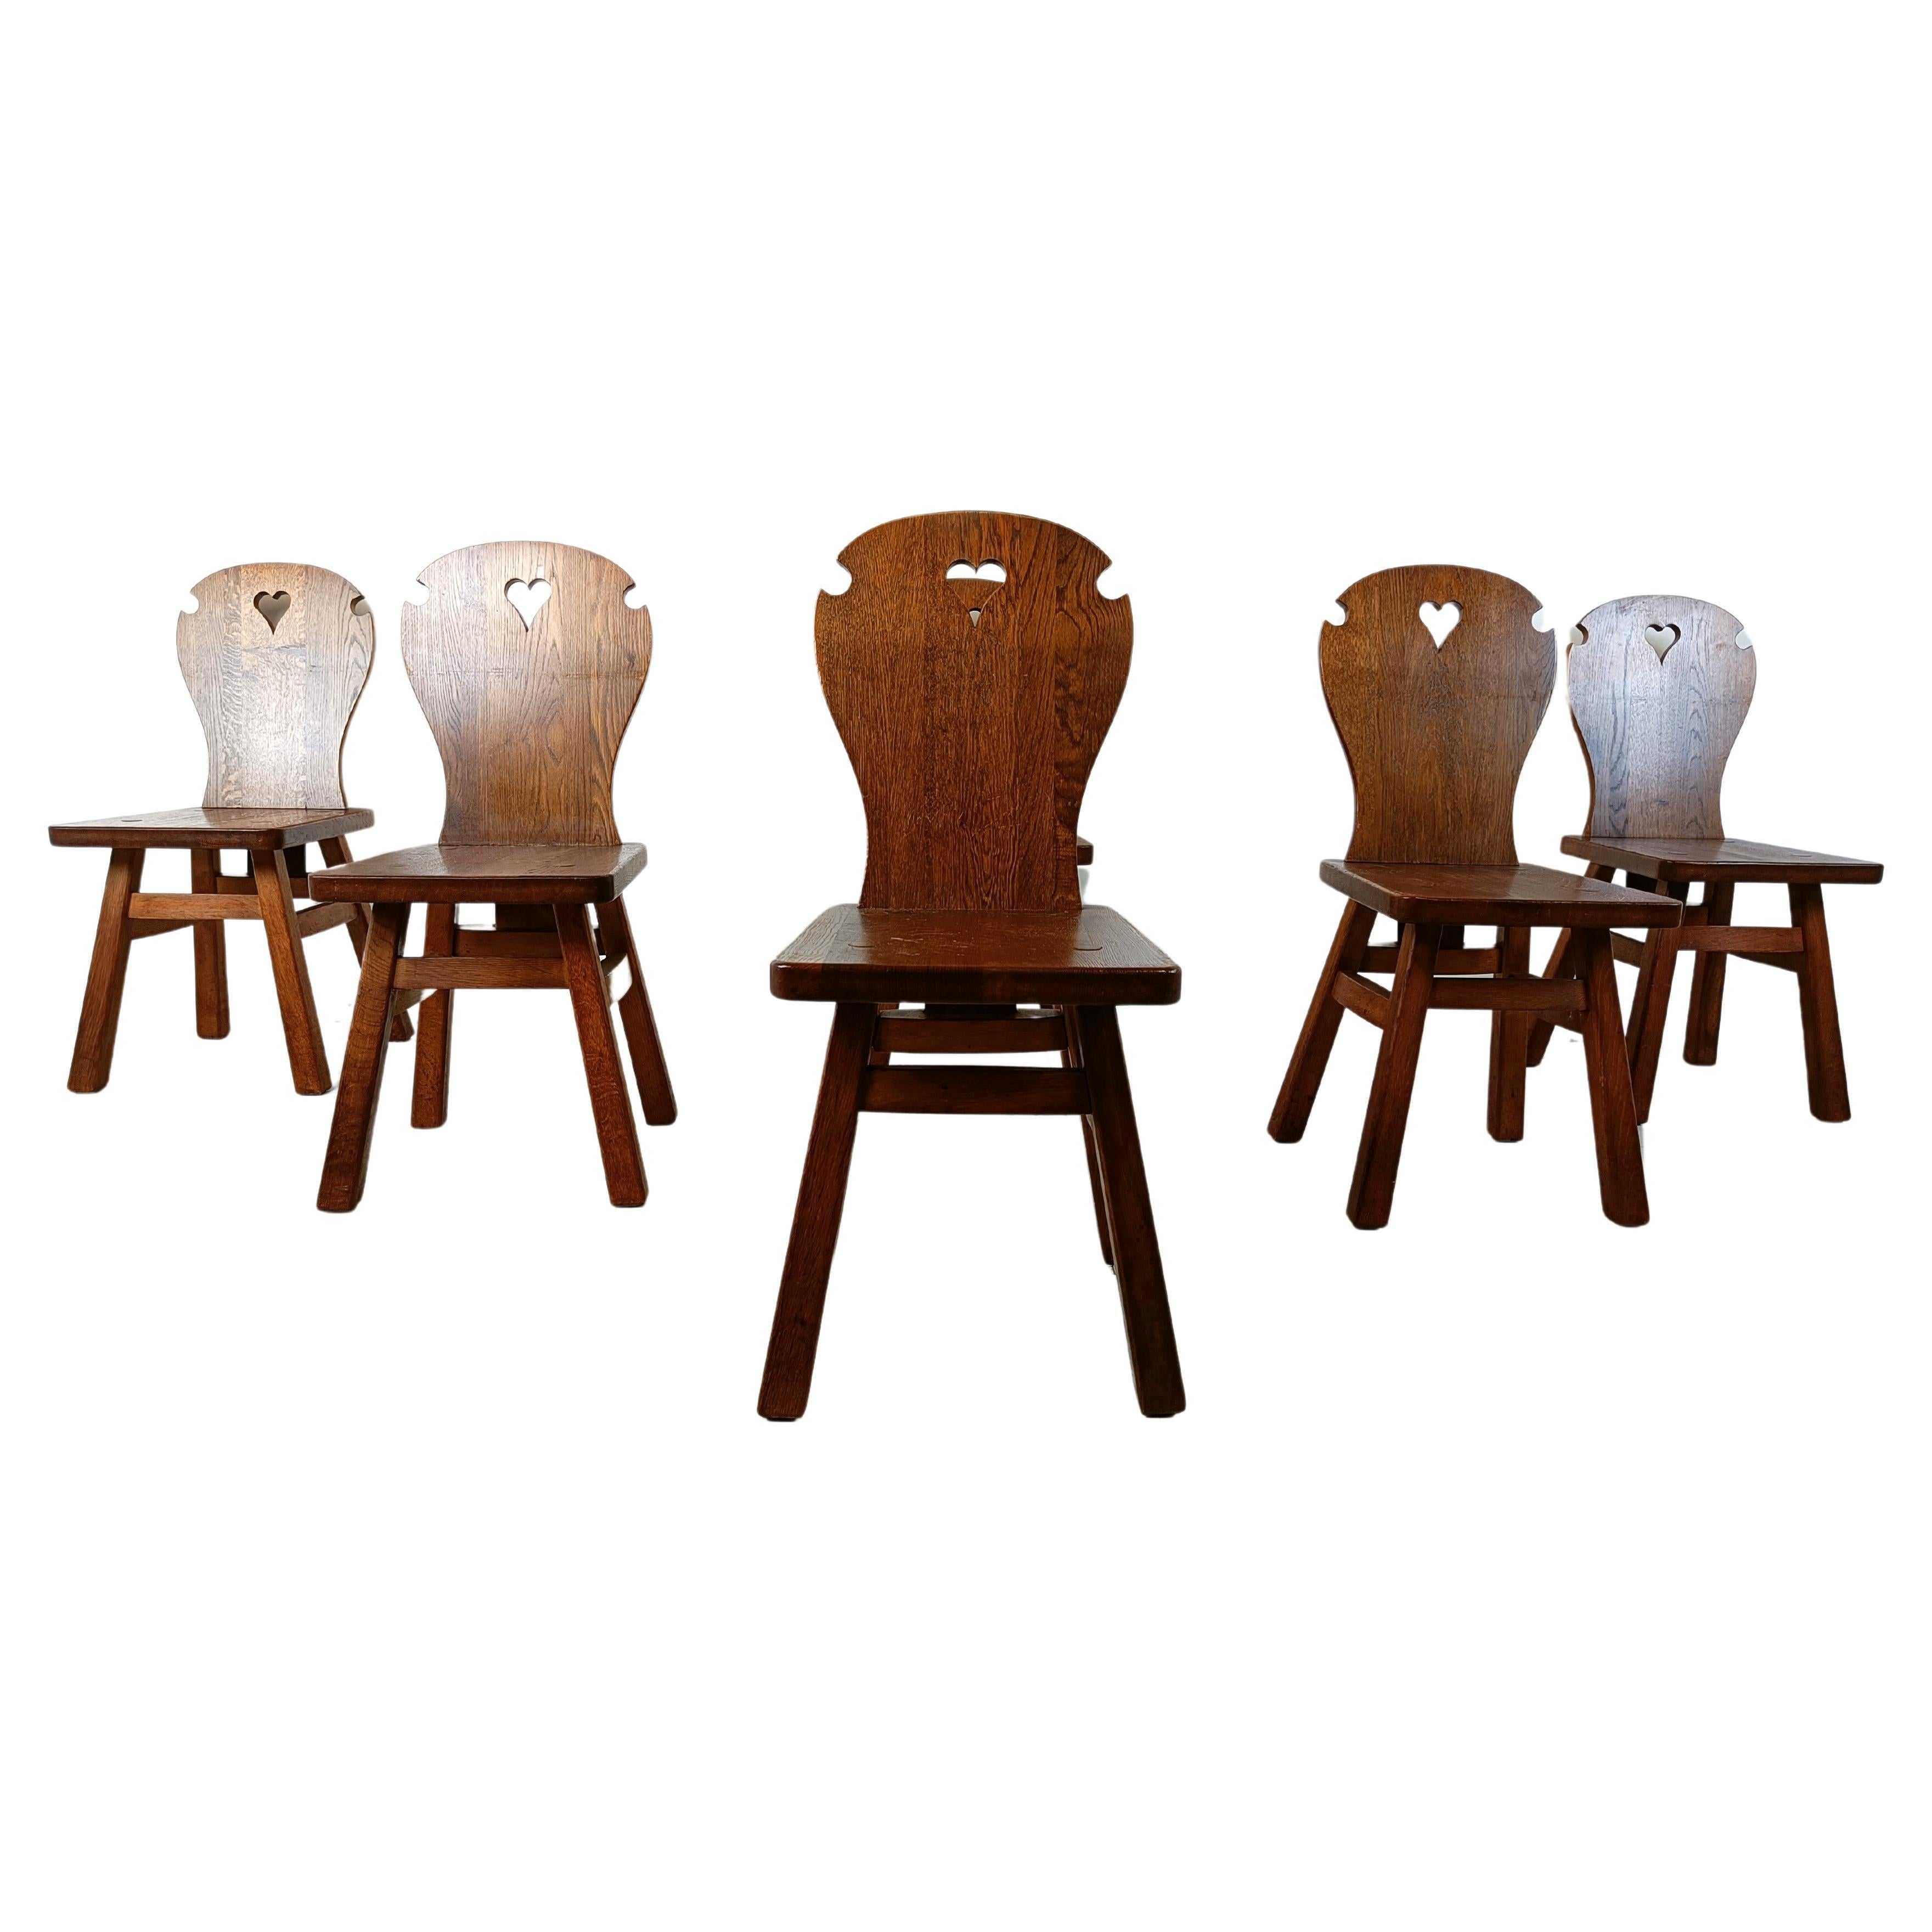 Vintage brutalist dining chairs, set of 6 - 1960s  For Sale